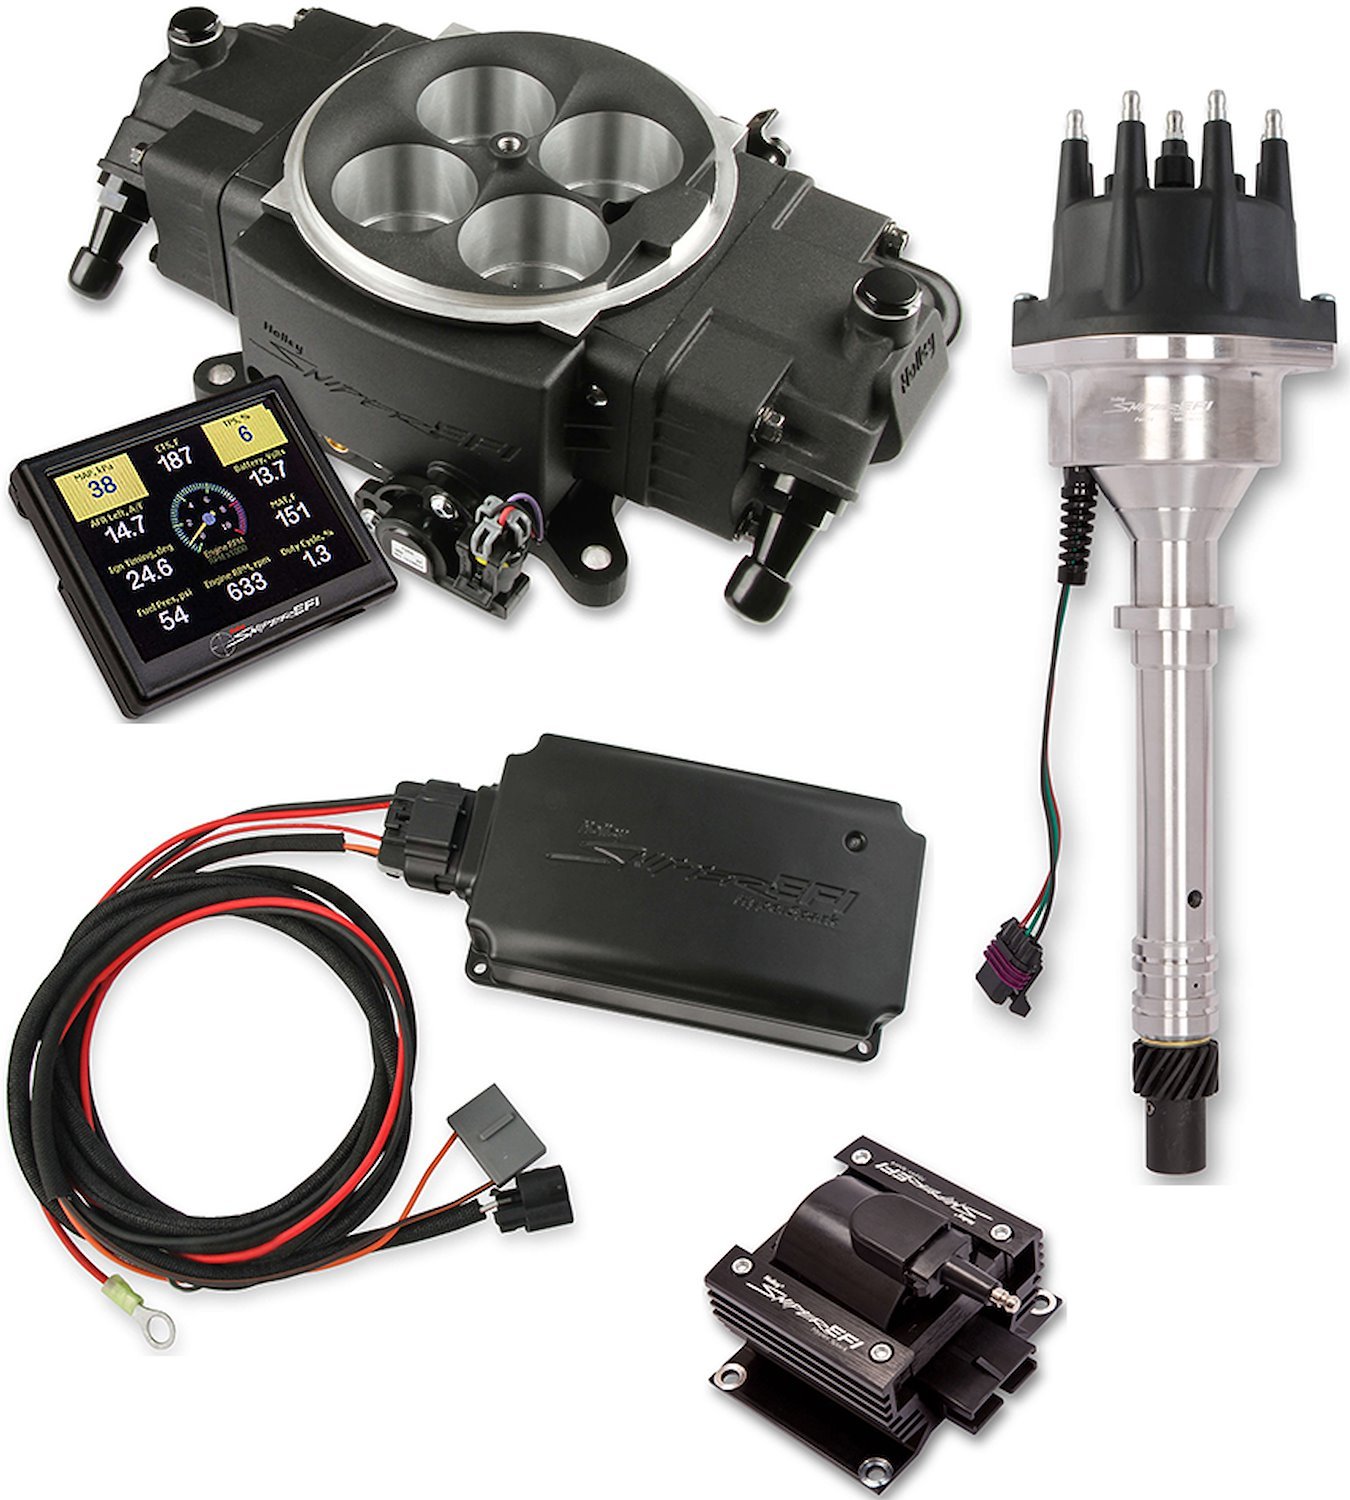 Sniper Stealth 4150 Self-Tuning Fuel Injection System Kit, Black Finish